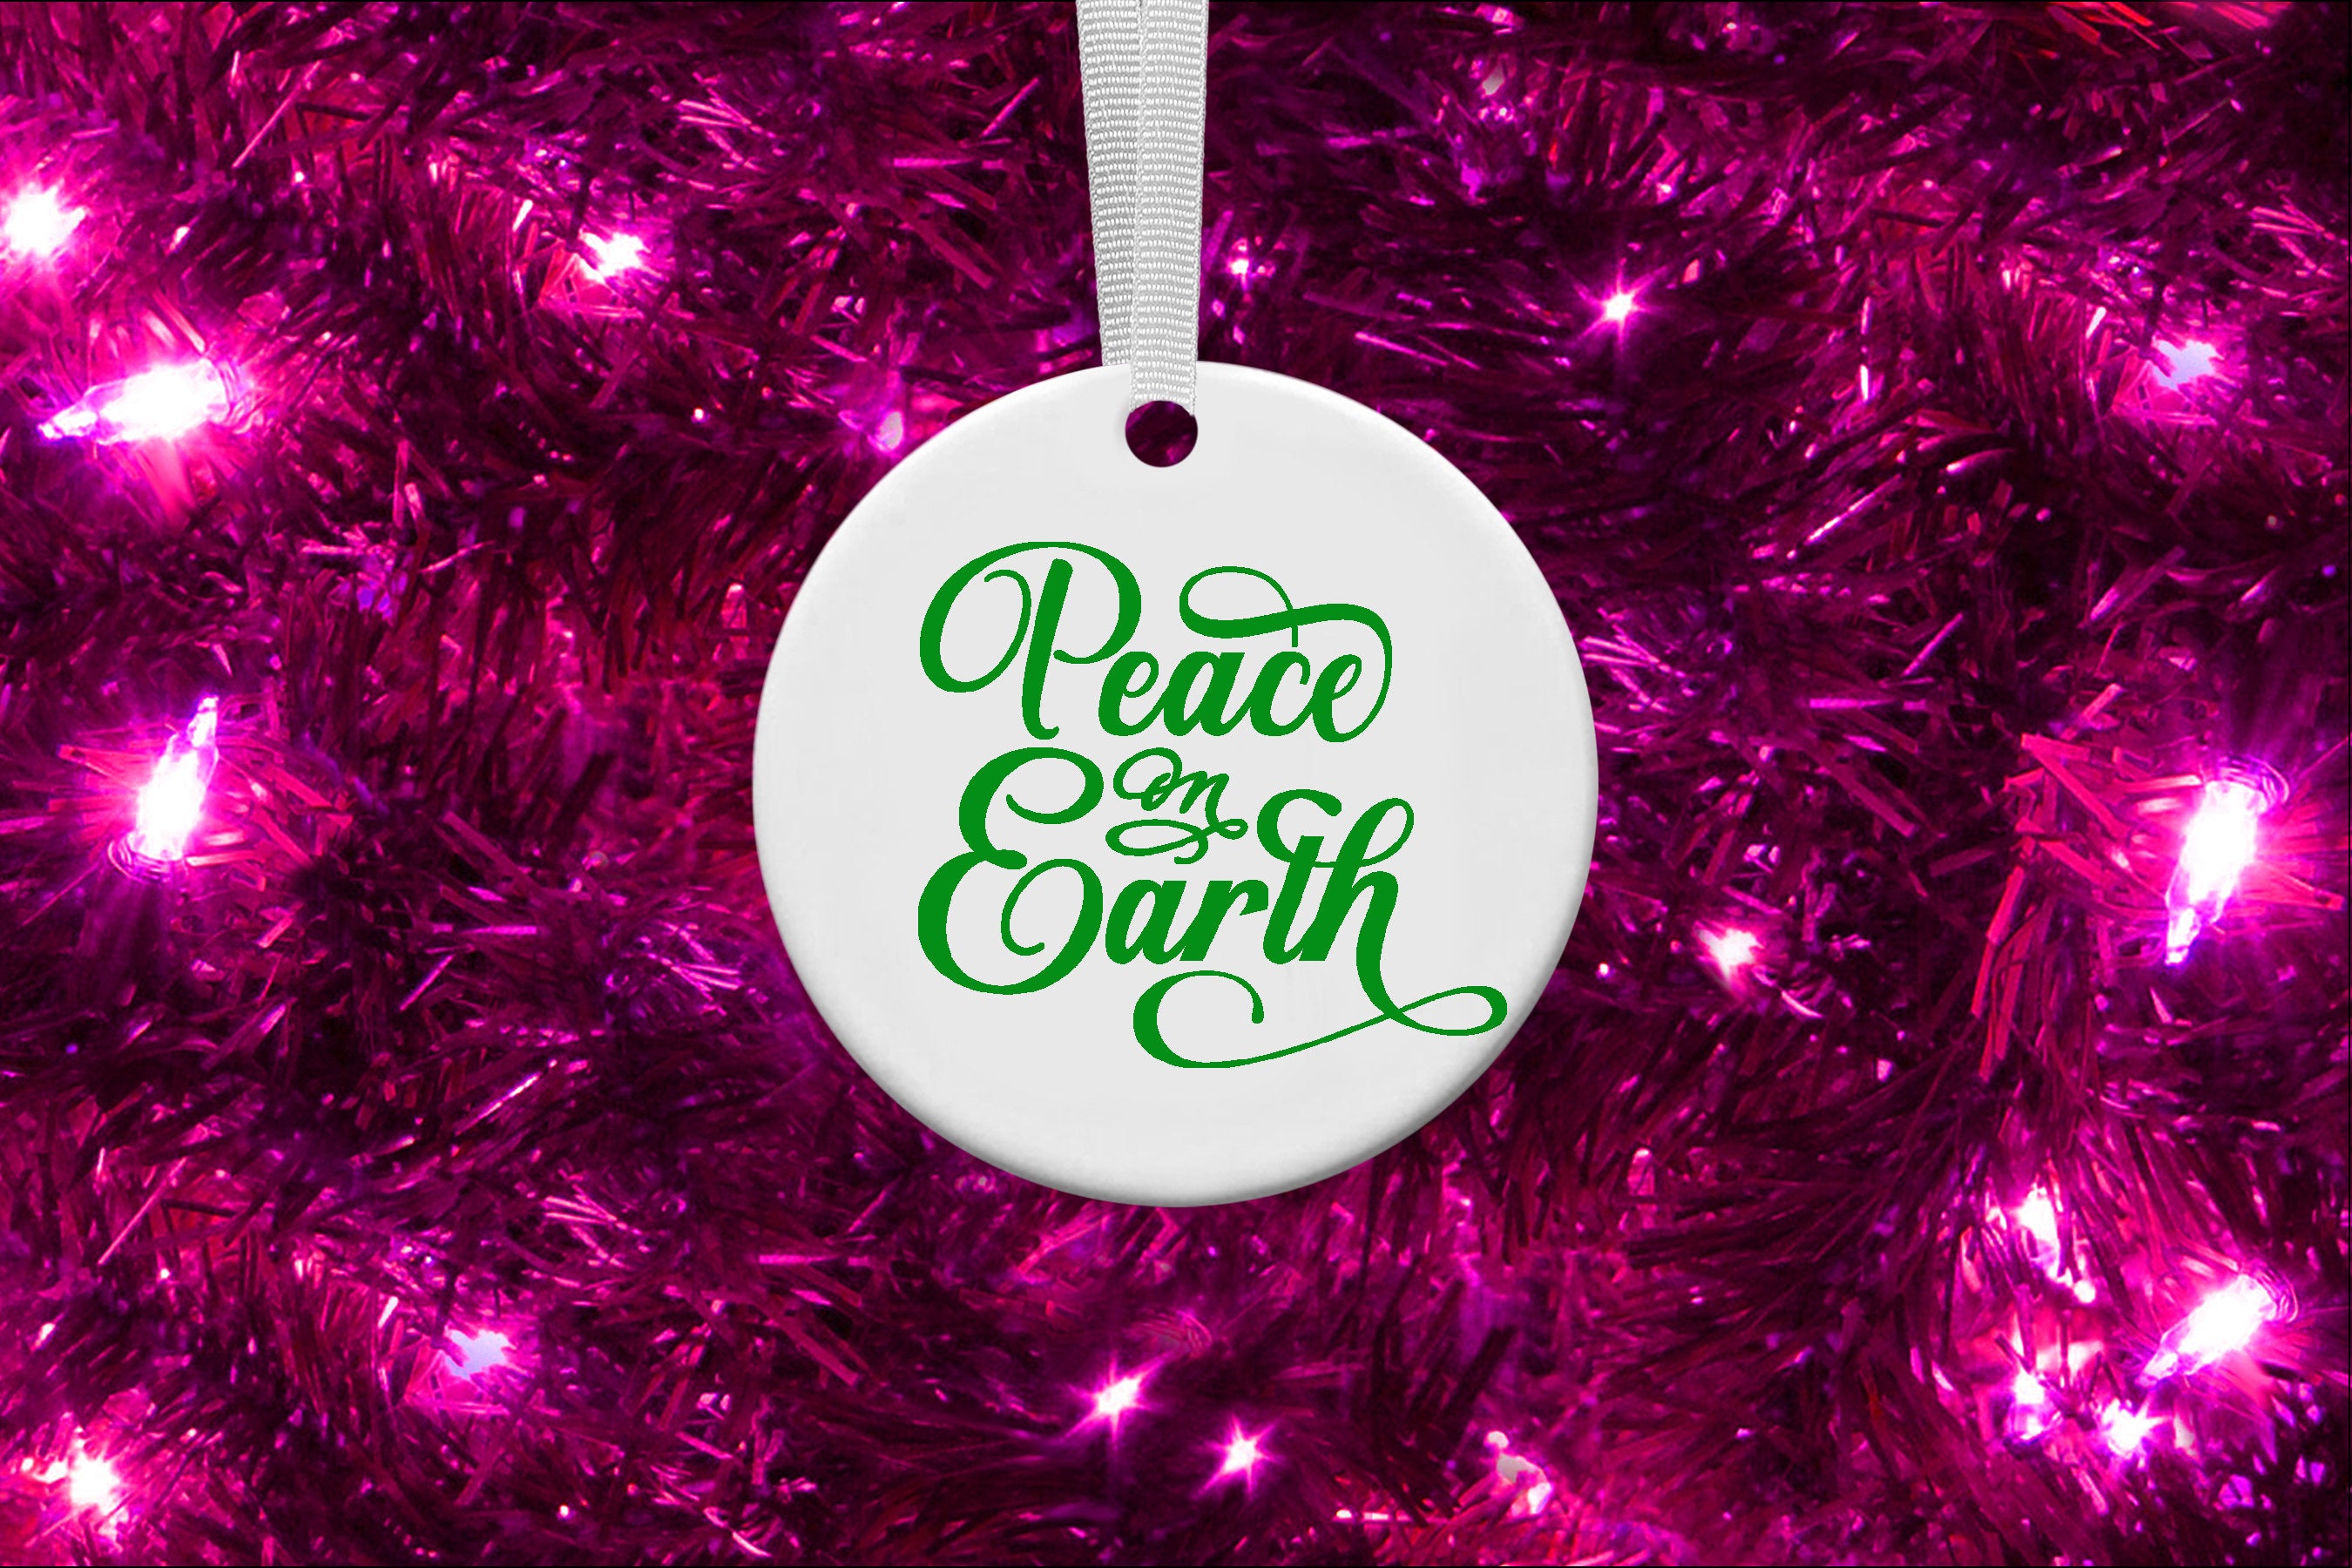 Peace on Earth Round Ceramic Ornament for Christmas Holiday - 3 inches